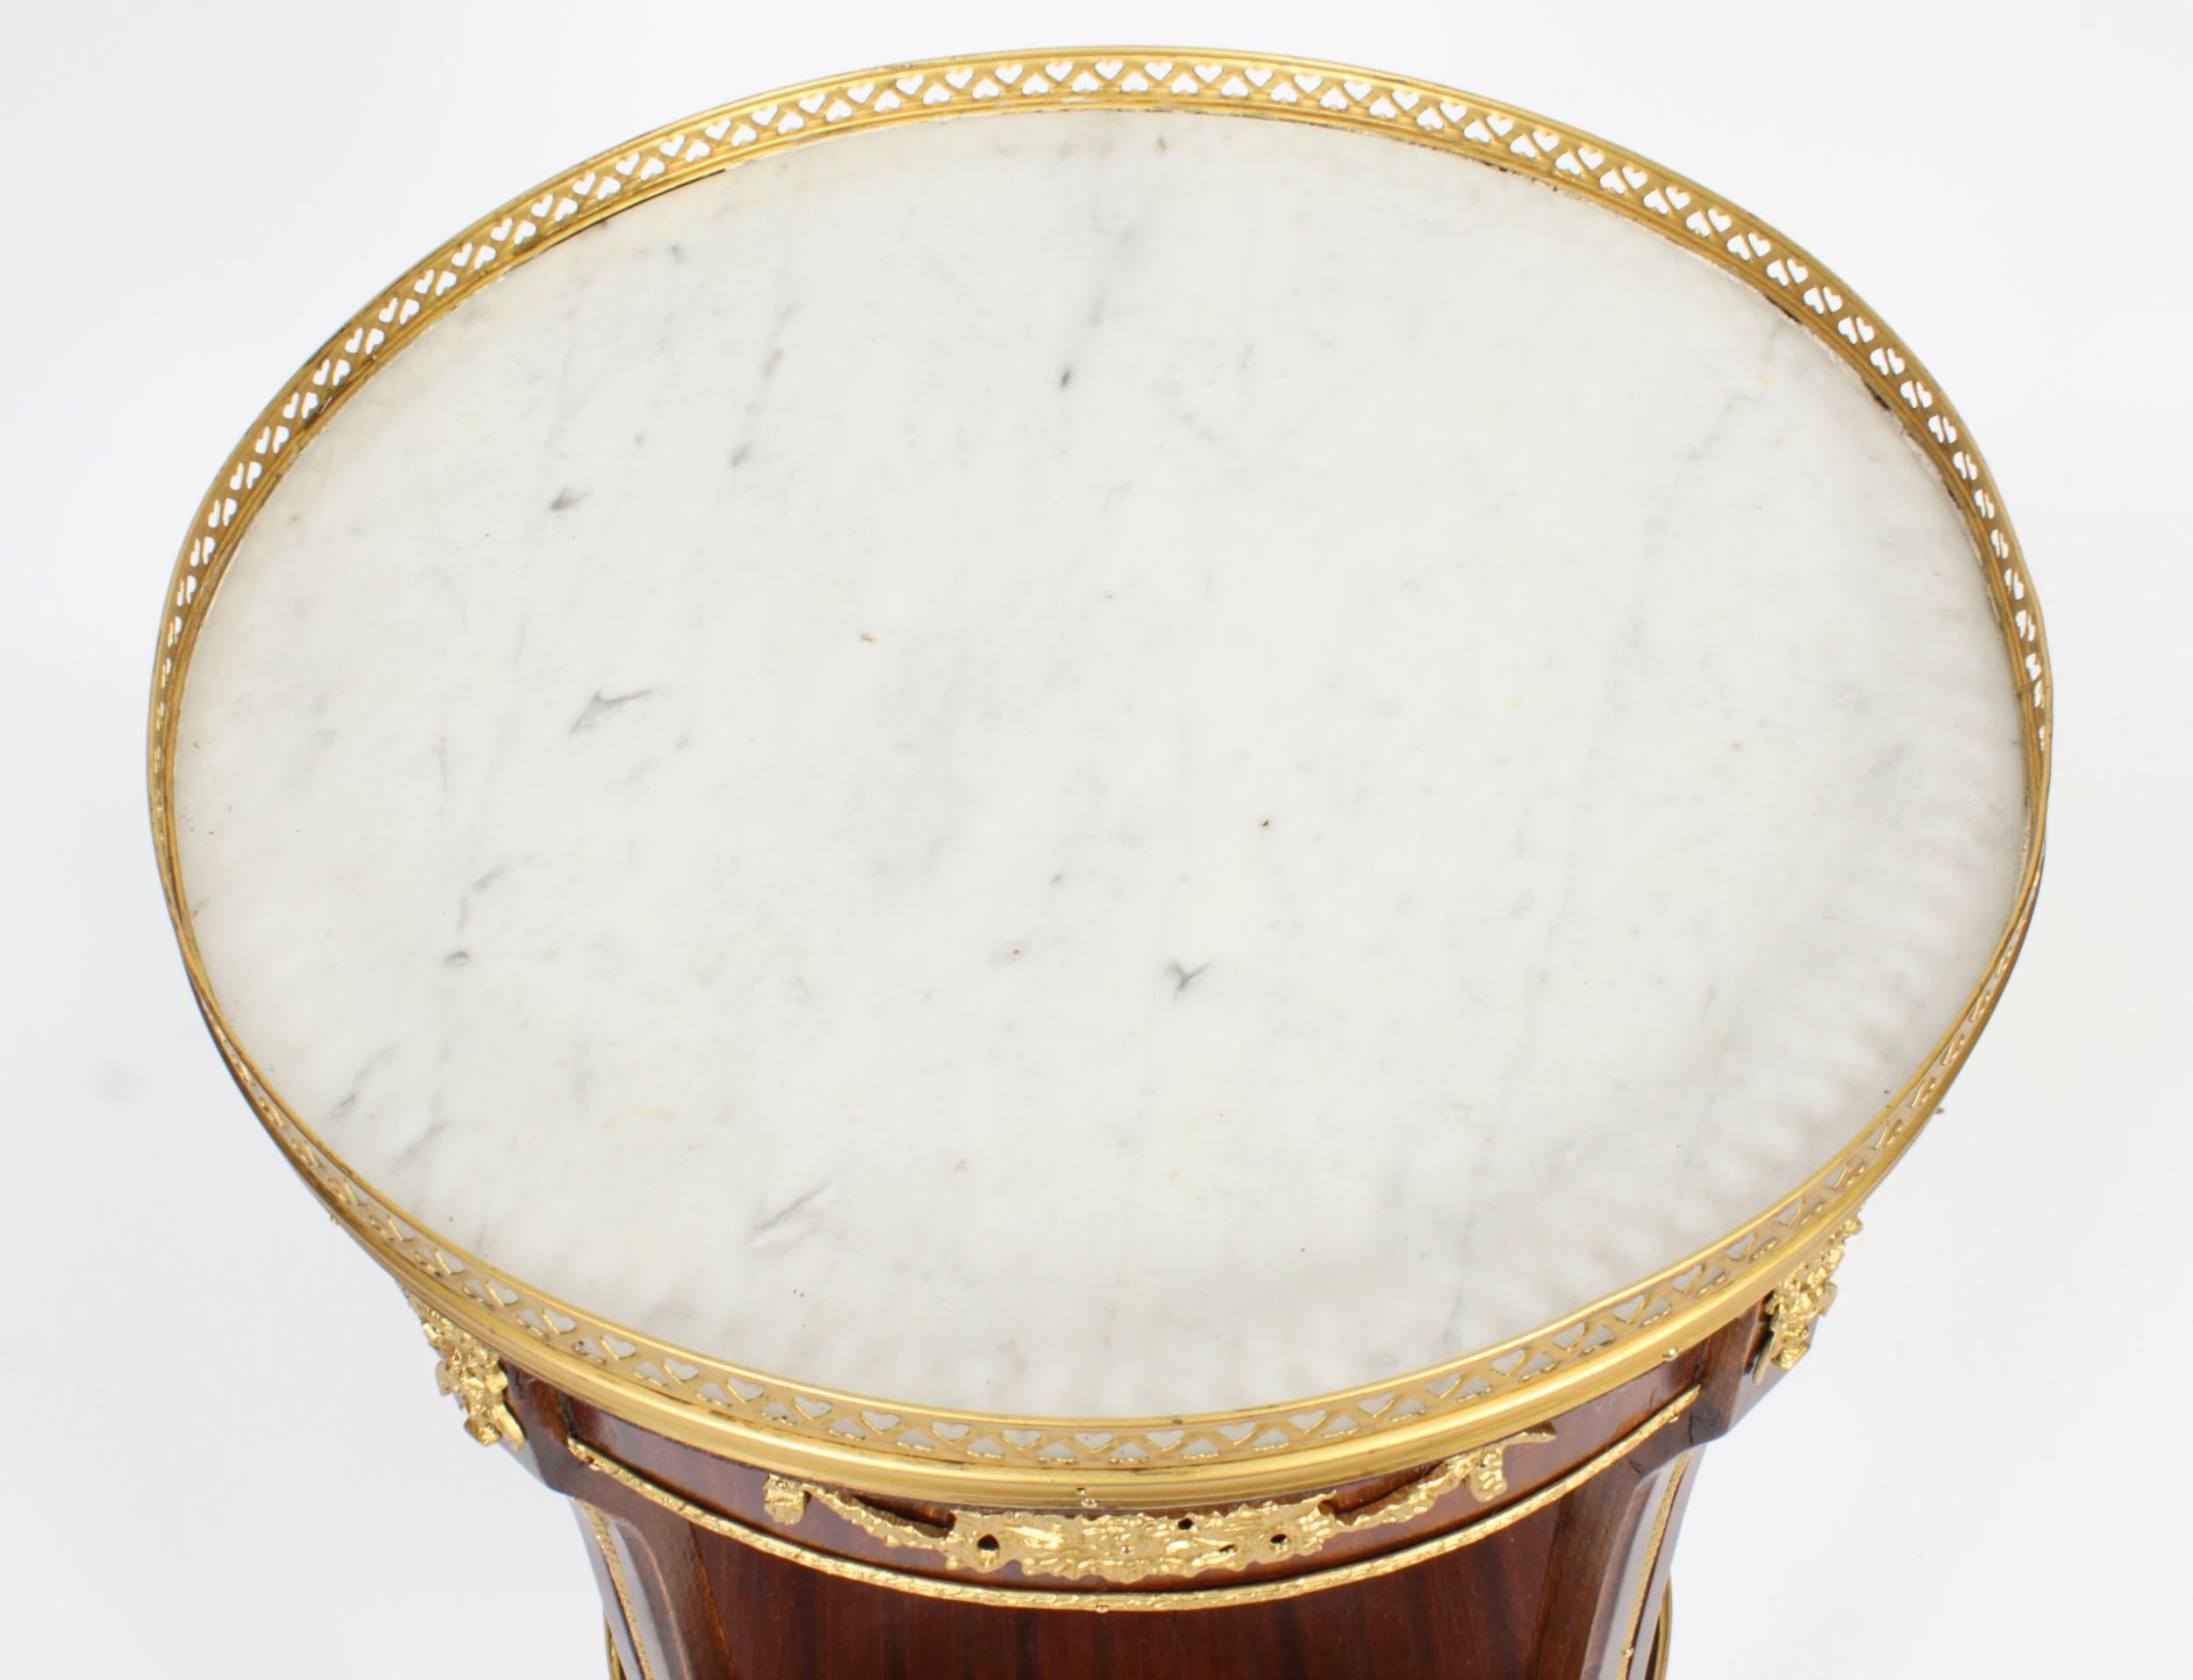 Antique French Empire Marble & Ormolu Occasional Table, 19th Century For Sale 8